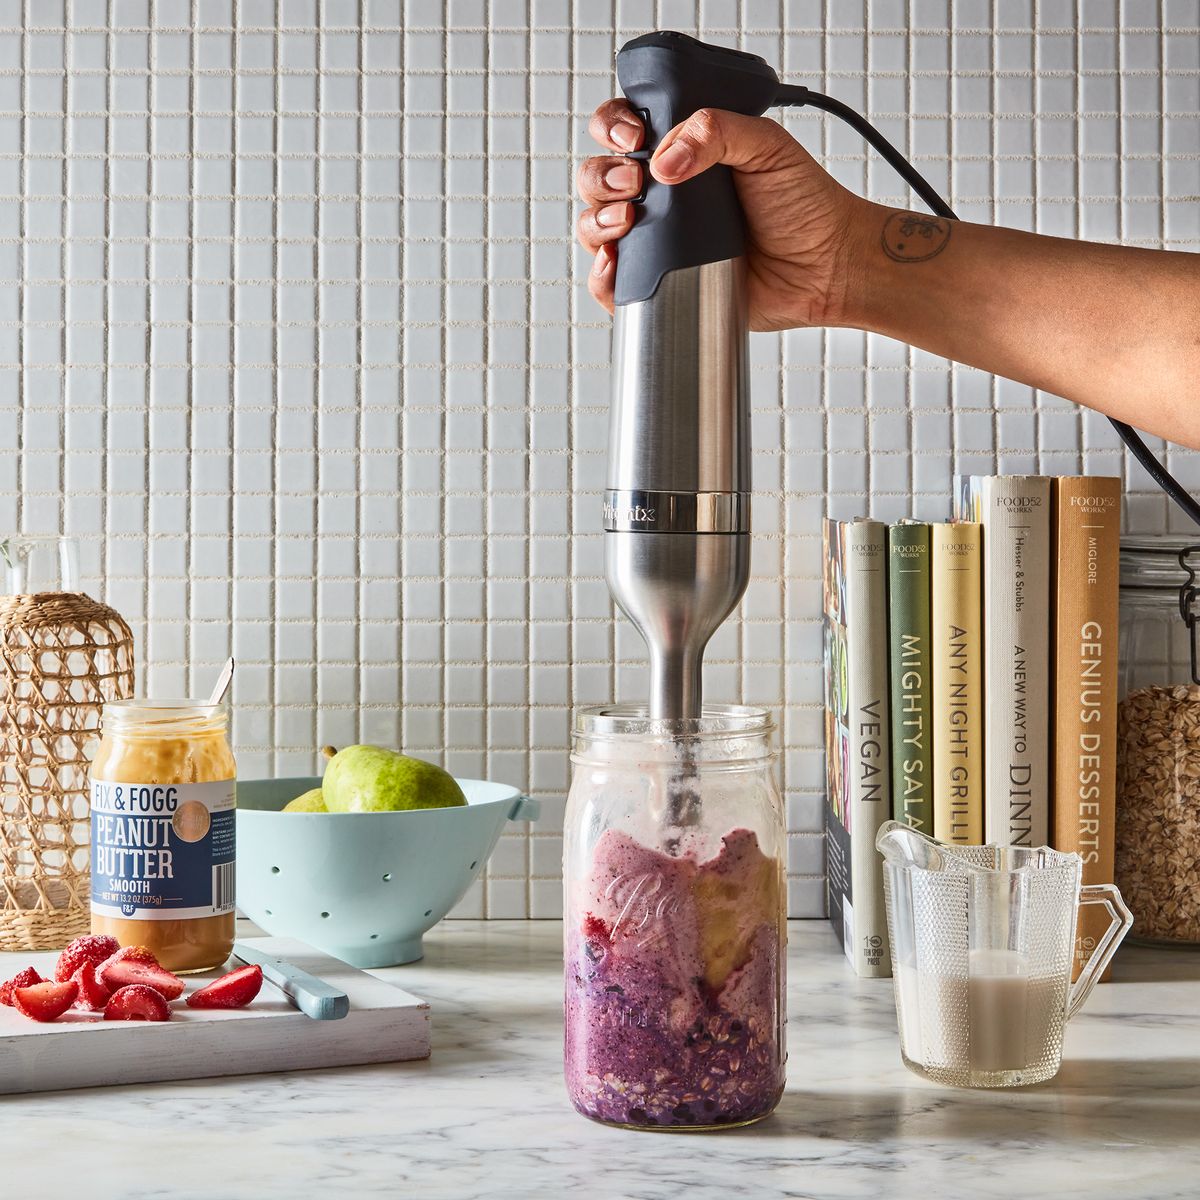 Over 10 Fun Kitchen Gadgets That Make Perfect Gifts - Inspiring Momma